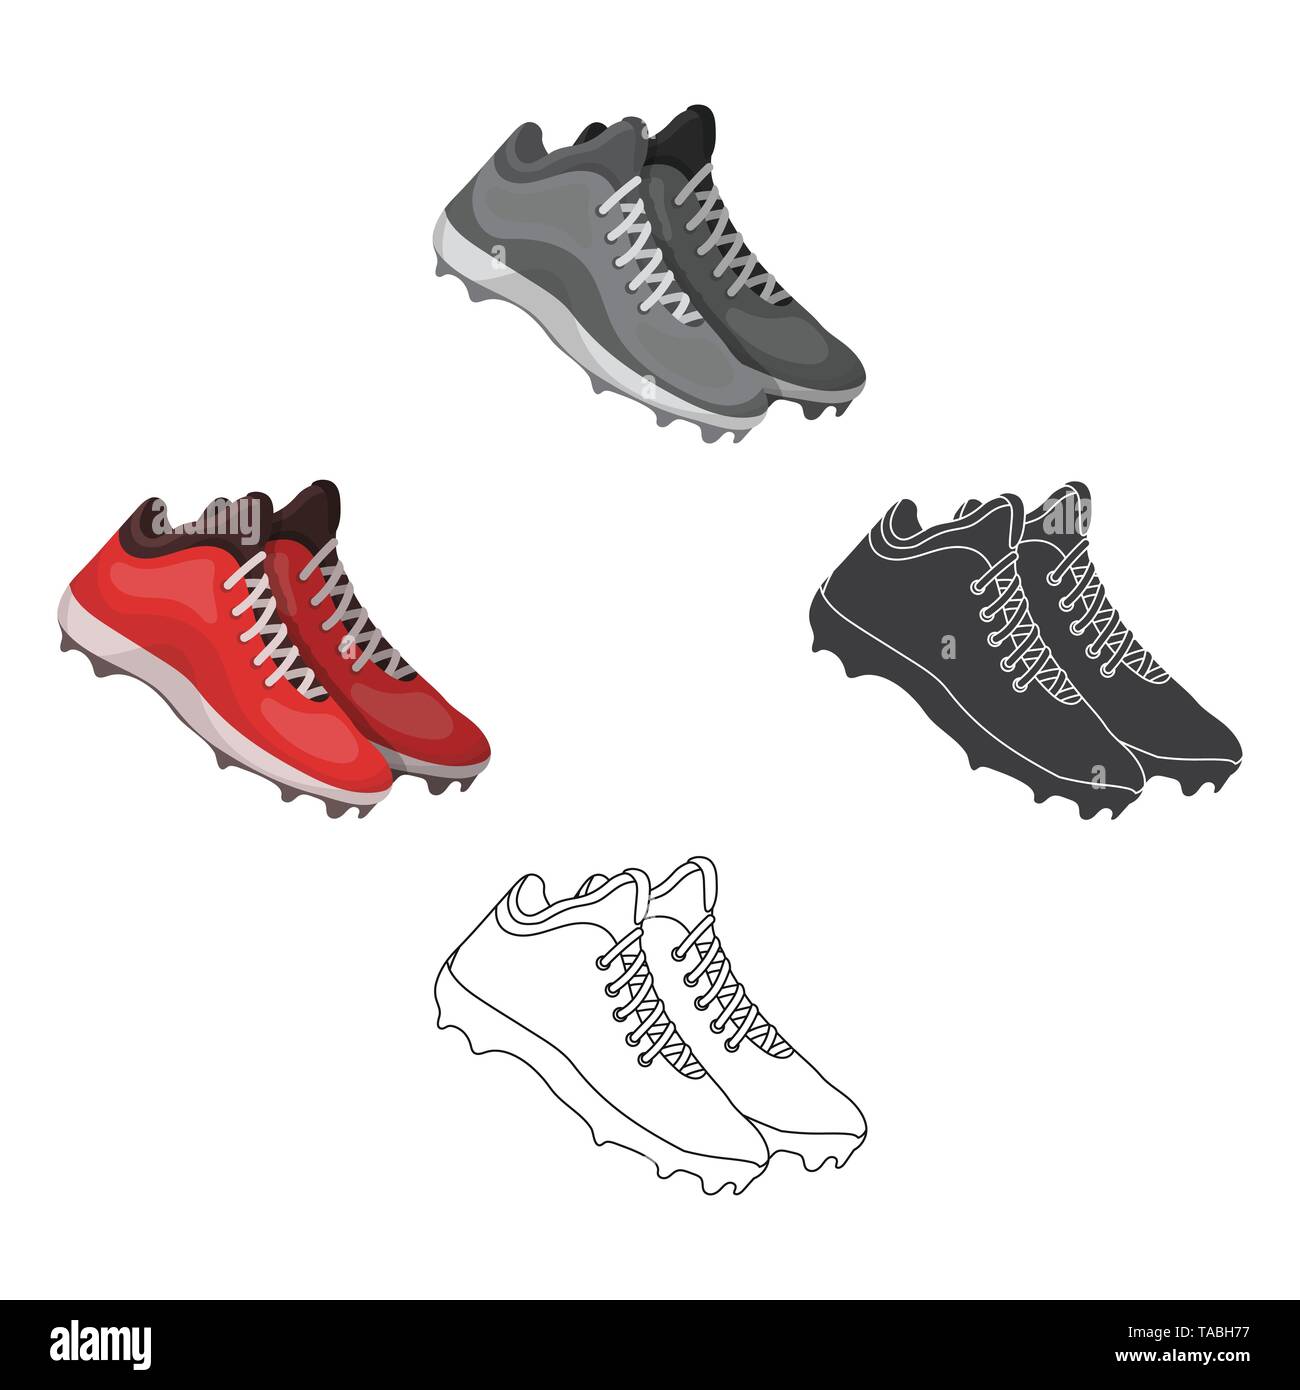 American,sportif,baseball,sportif,boot,caricature,Black,concours,fashion, foot,foot,icône,chaussures,illustration,dentelle,isolé,cuir,,logo ,national,TOURNANT,objet,chaussures sneaker,signe,chaussures,football,pointes  pointes,sport,équipe,symbole,toe,web ...